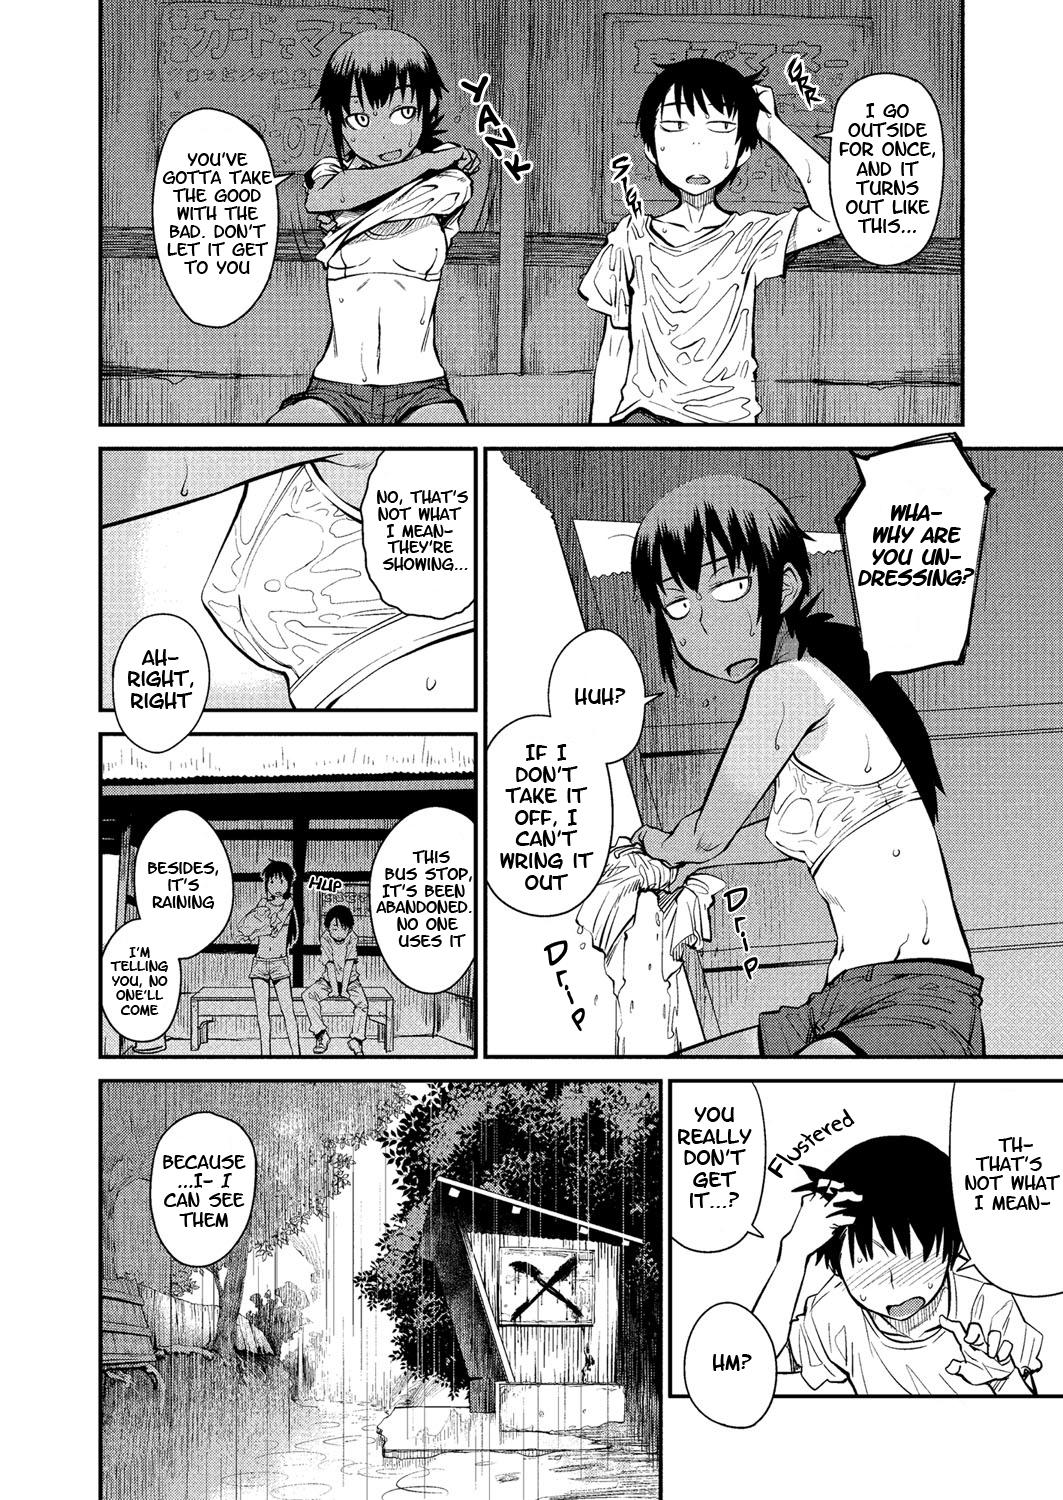 Japanese Natsu no Bus-tei | Summertime Bus Stop Snatch - Page 6